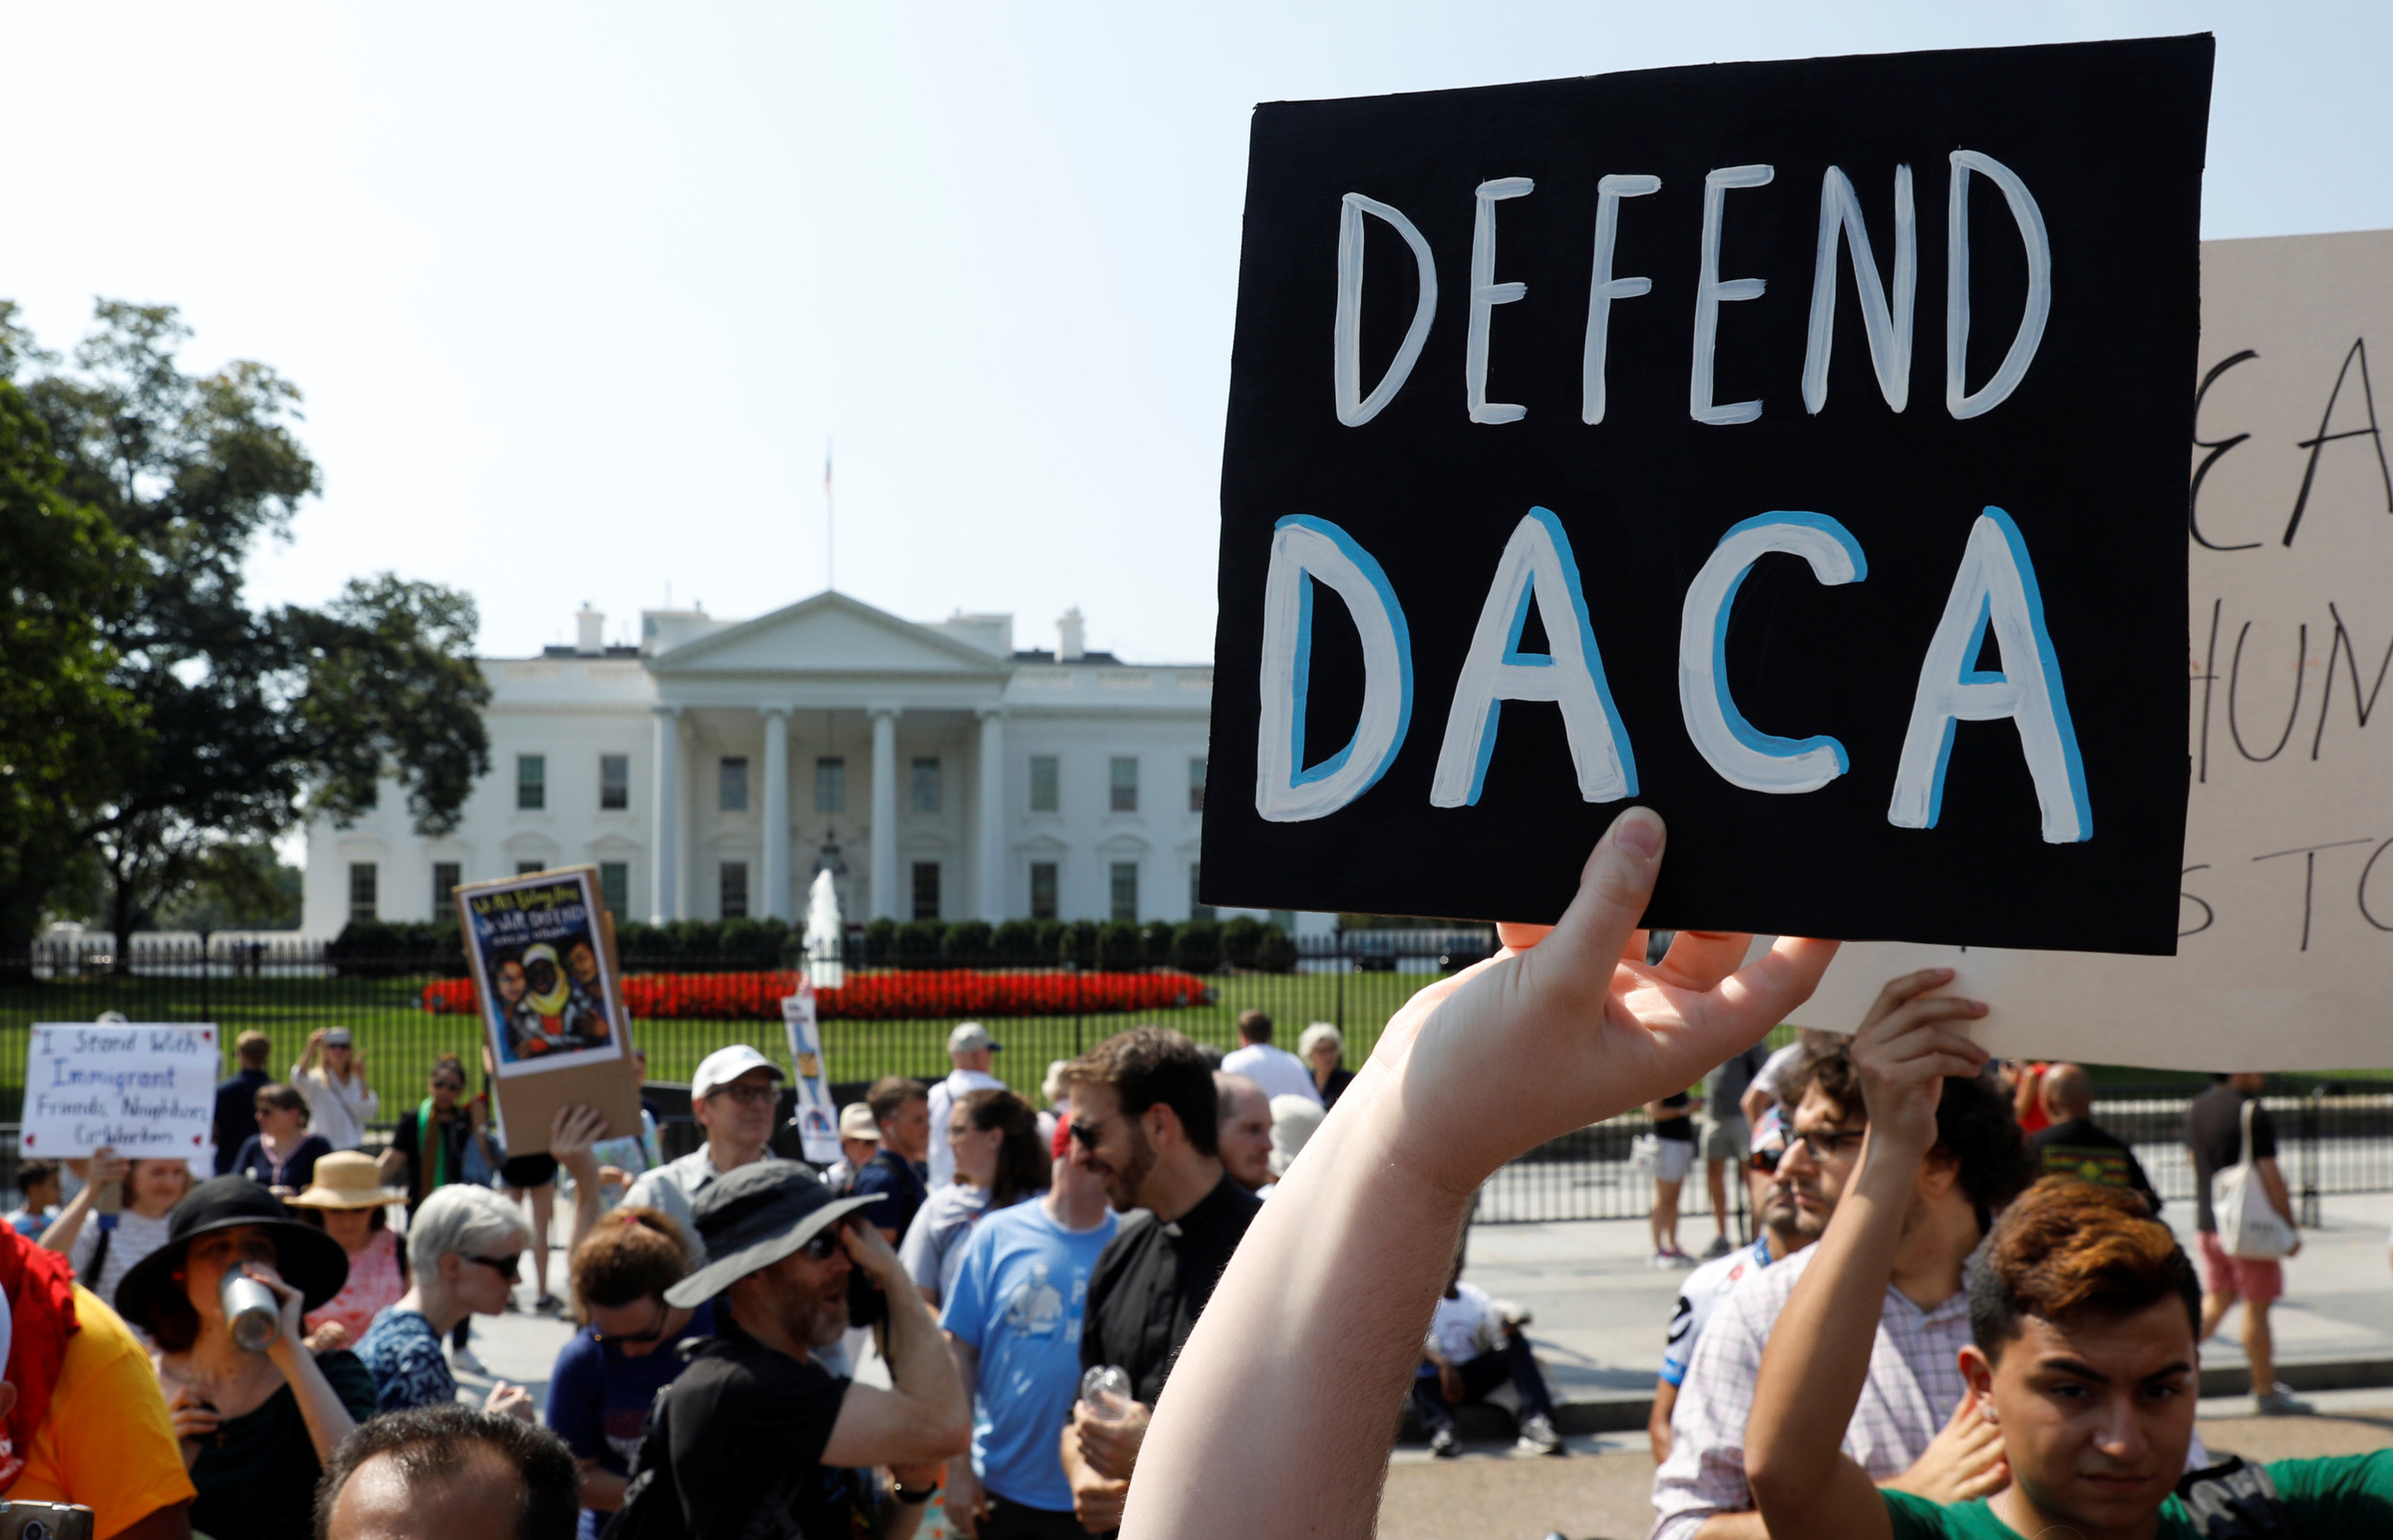 Catholic leaders sharply criticize Trump s decision to end DACA The